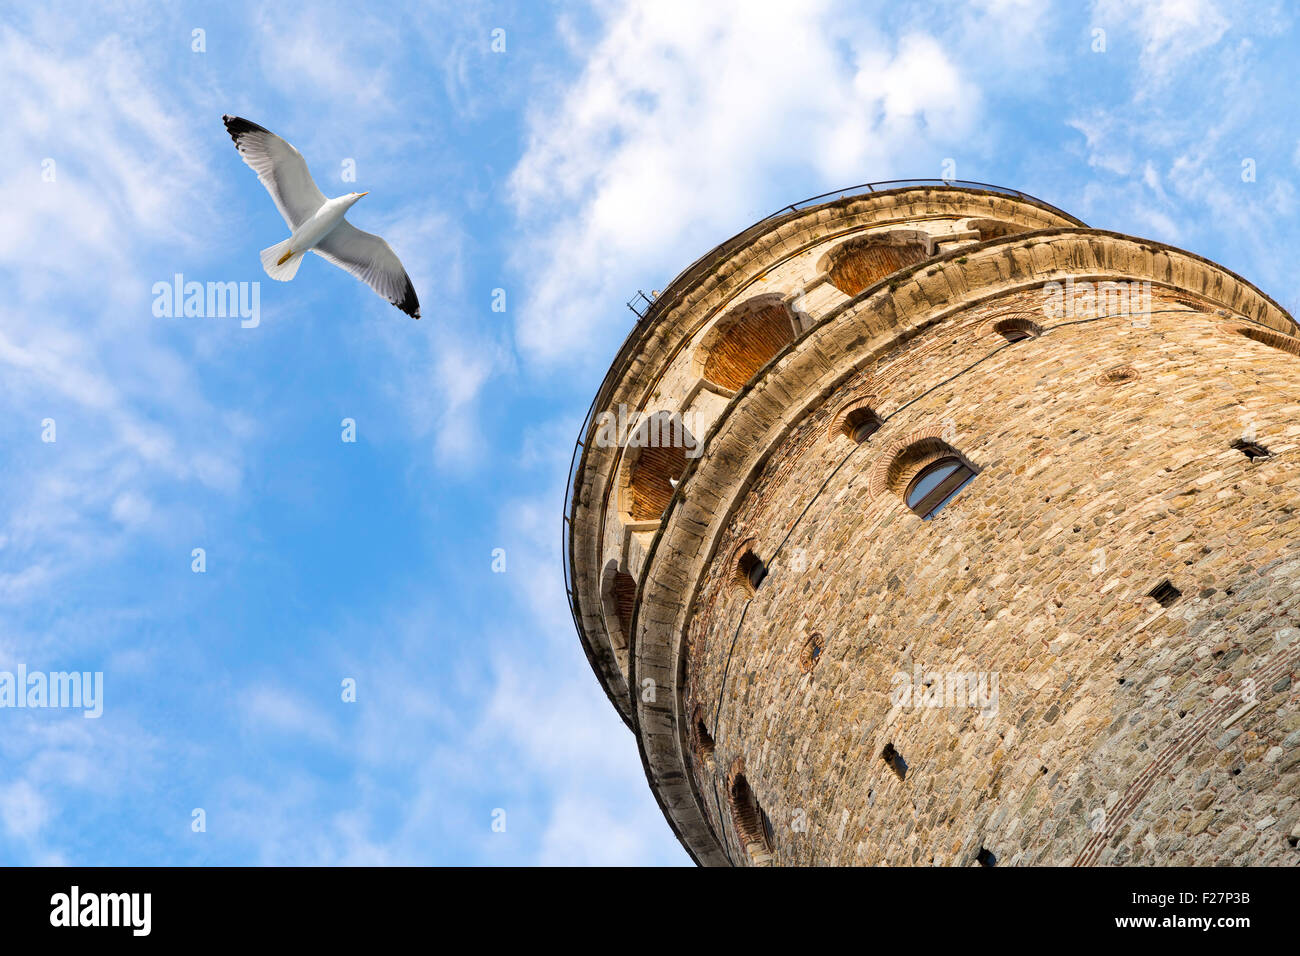 Flying seagull near the Galata Tower is a medieval stone tower in the Galata, Istanbul, Turkey Stock Photo